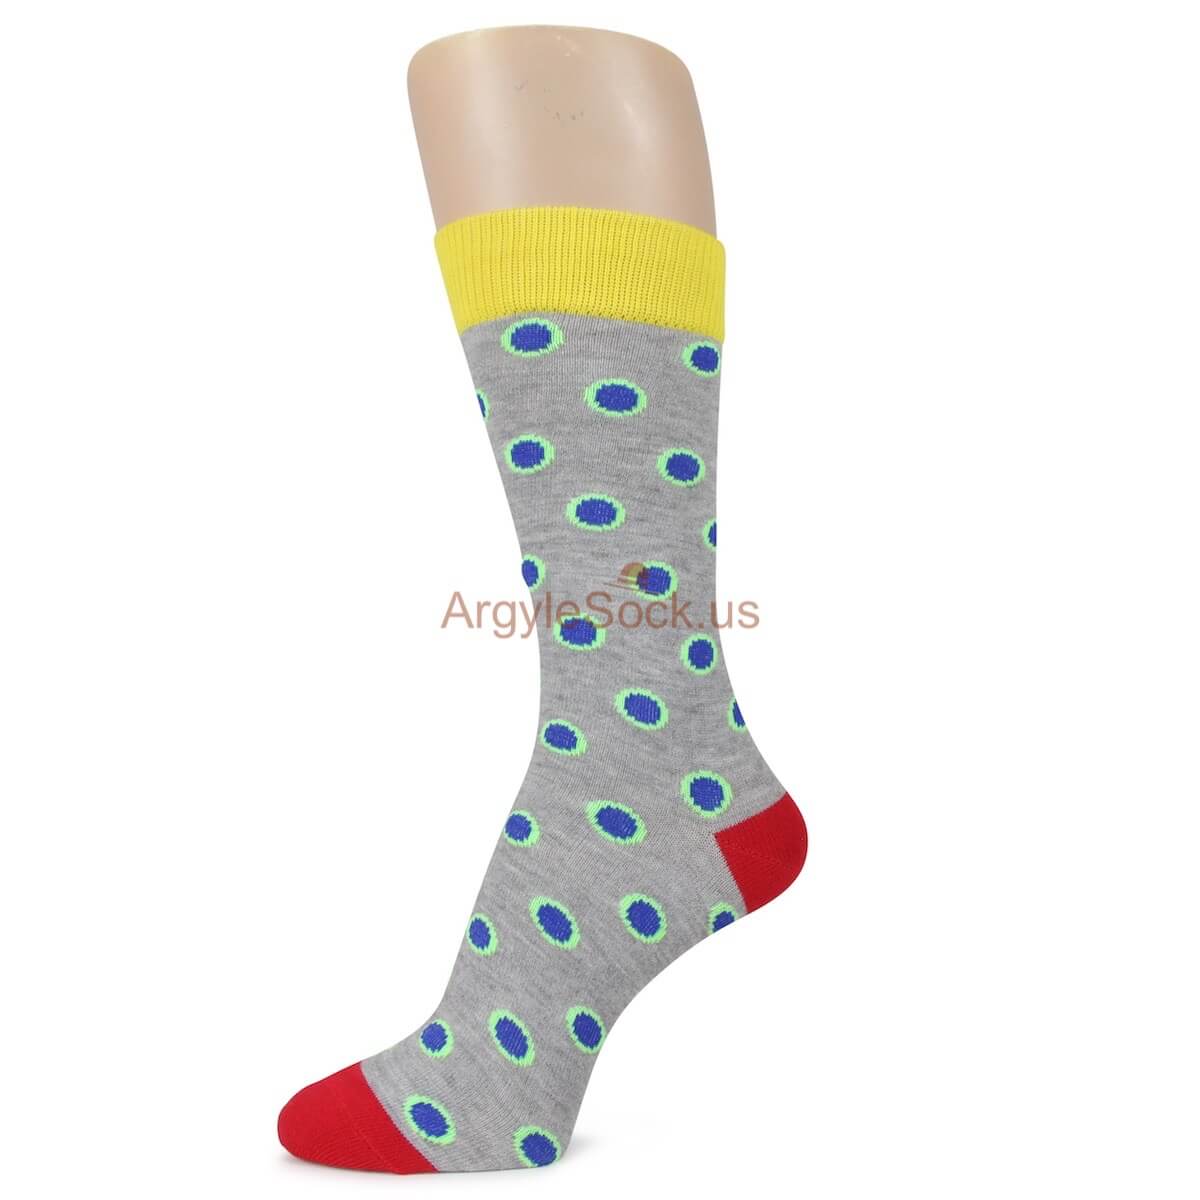 Grey, Yellow and Red with Purple Dots Socks for Men